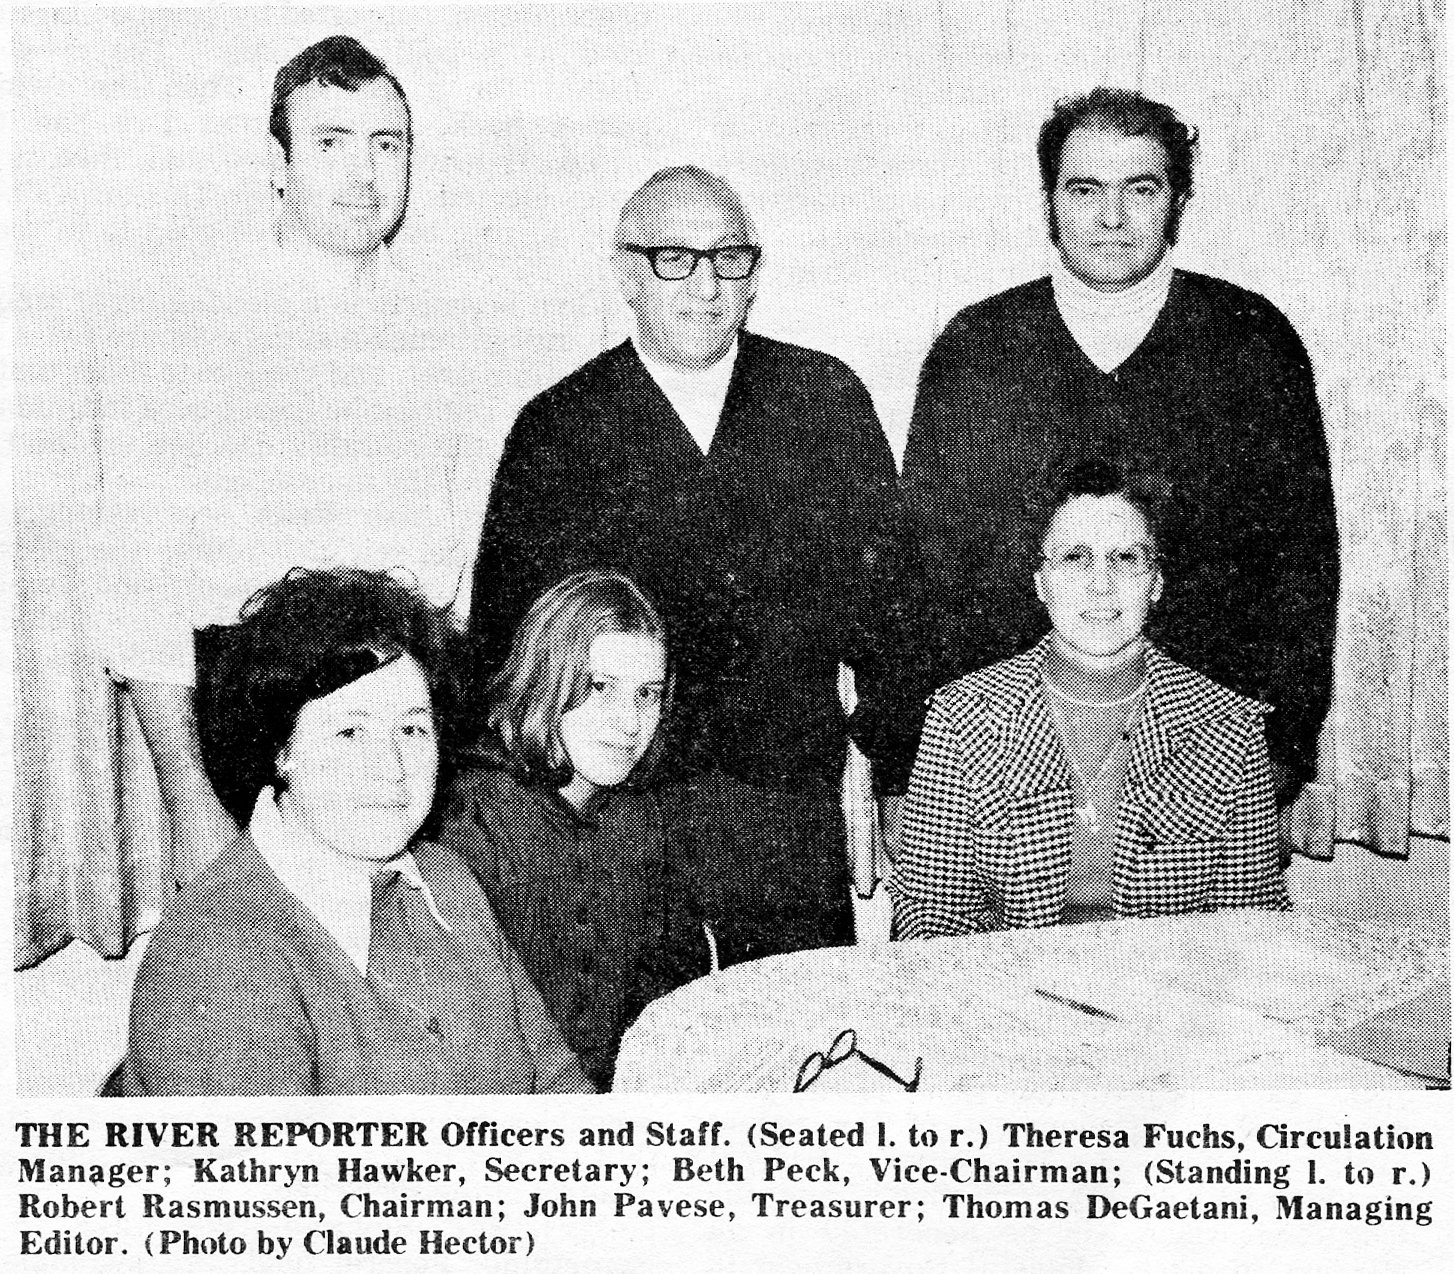 Beth Peck, seated right, was on the team of founders who, when the Delaware Valley News was moved to Hawley and became part of the Hawley News-Eagle, organized to restart a newspaper in Narrowsburg.